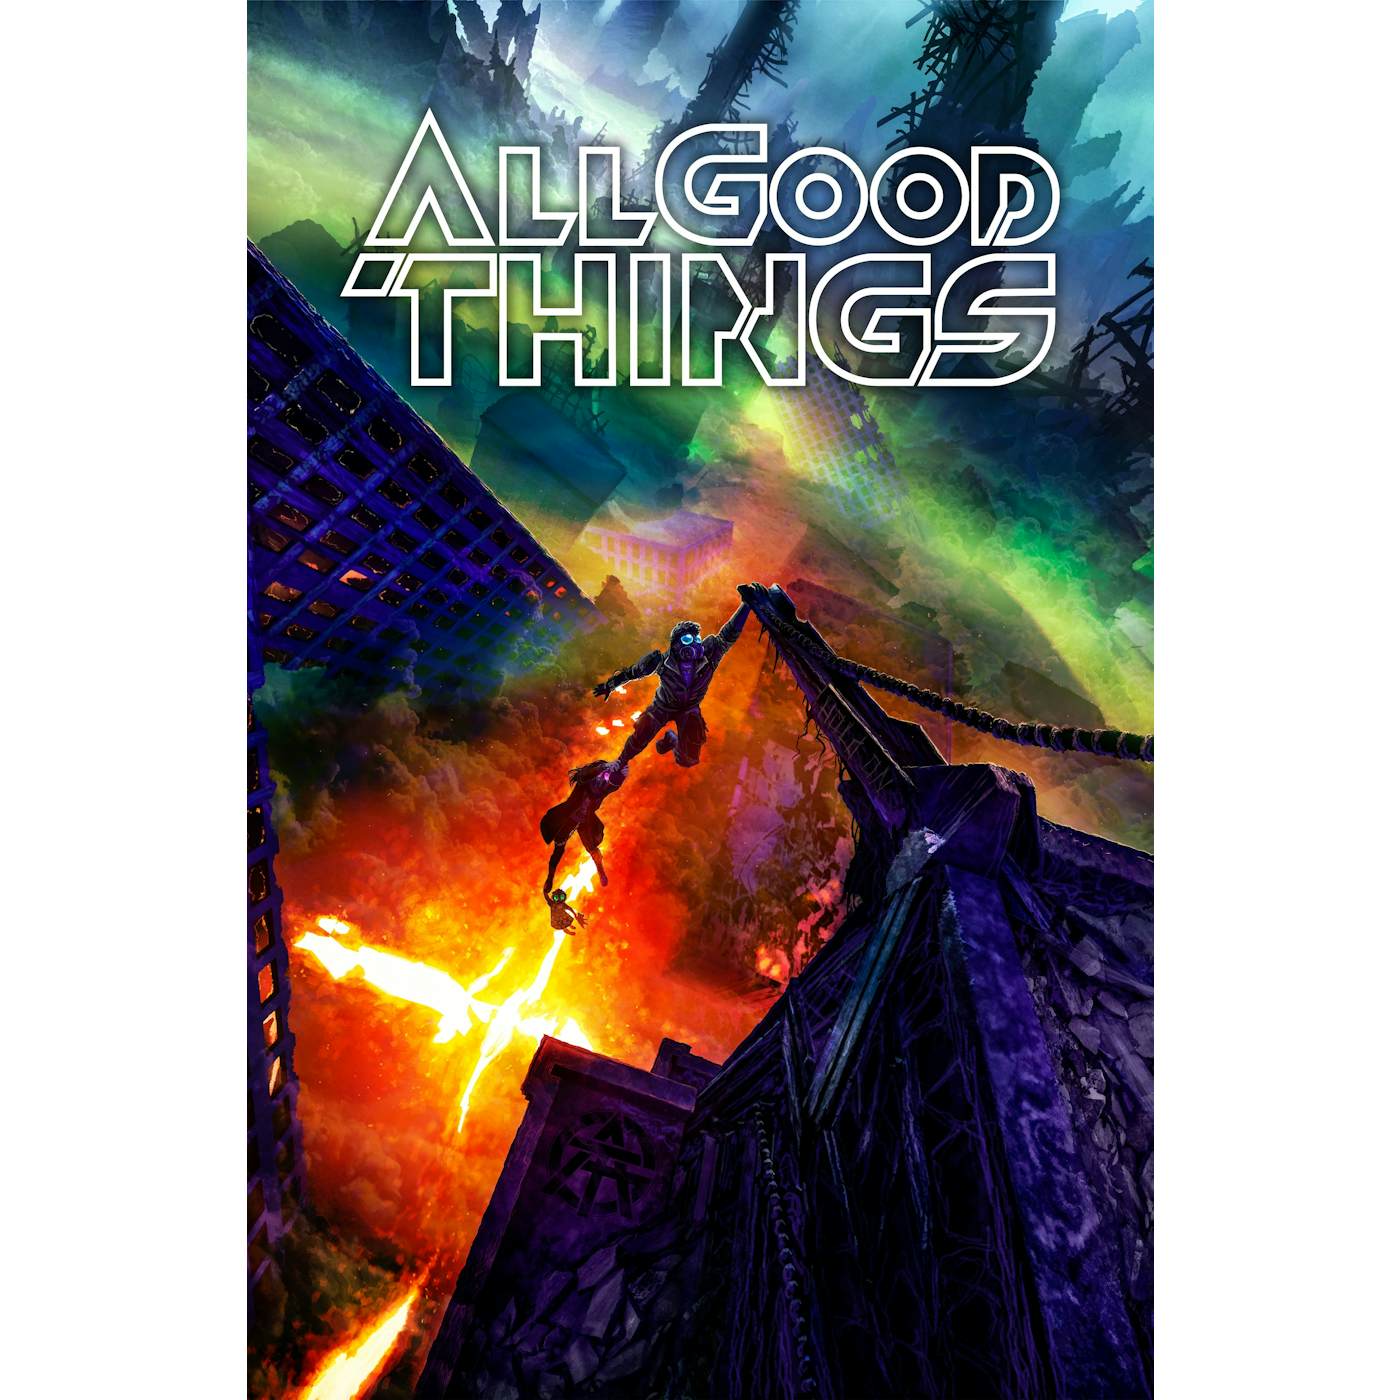 ALL GOOD THINGS - "HOLD ON" POSTER